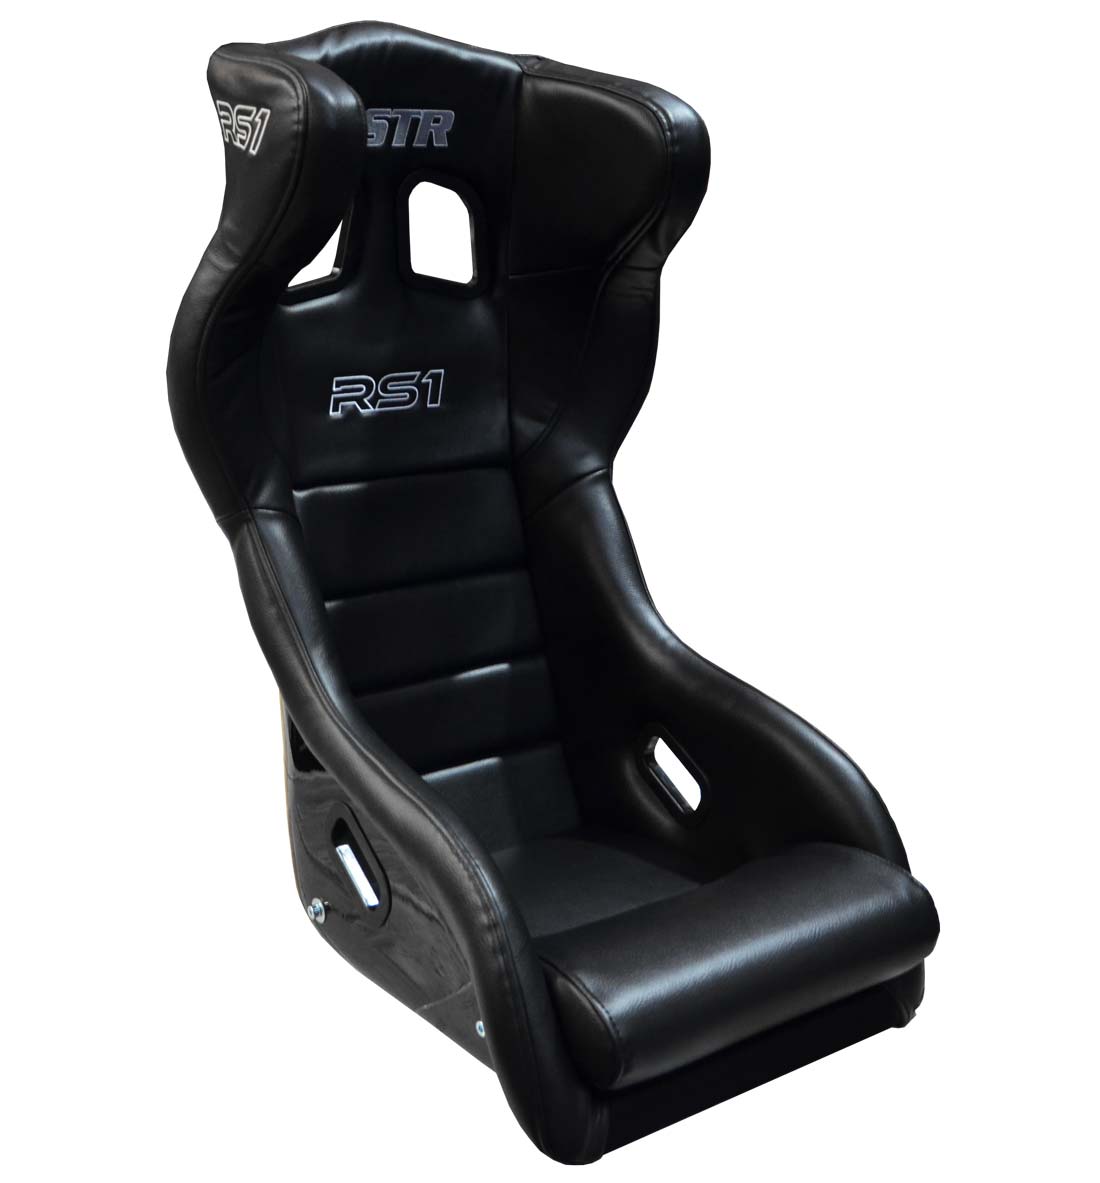 STR 'RS1' FIA Approved Race Seat - 2028 Black PVC Leather